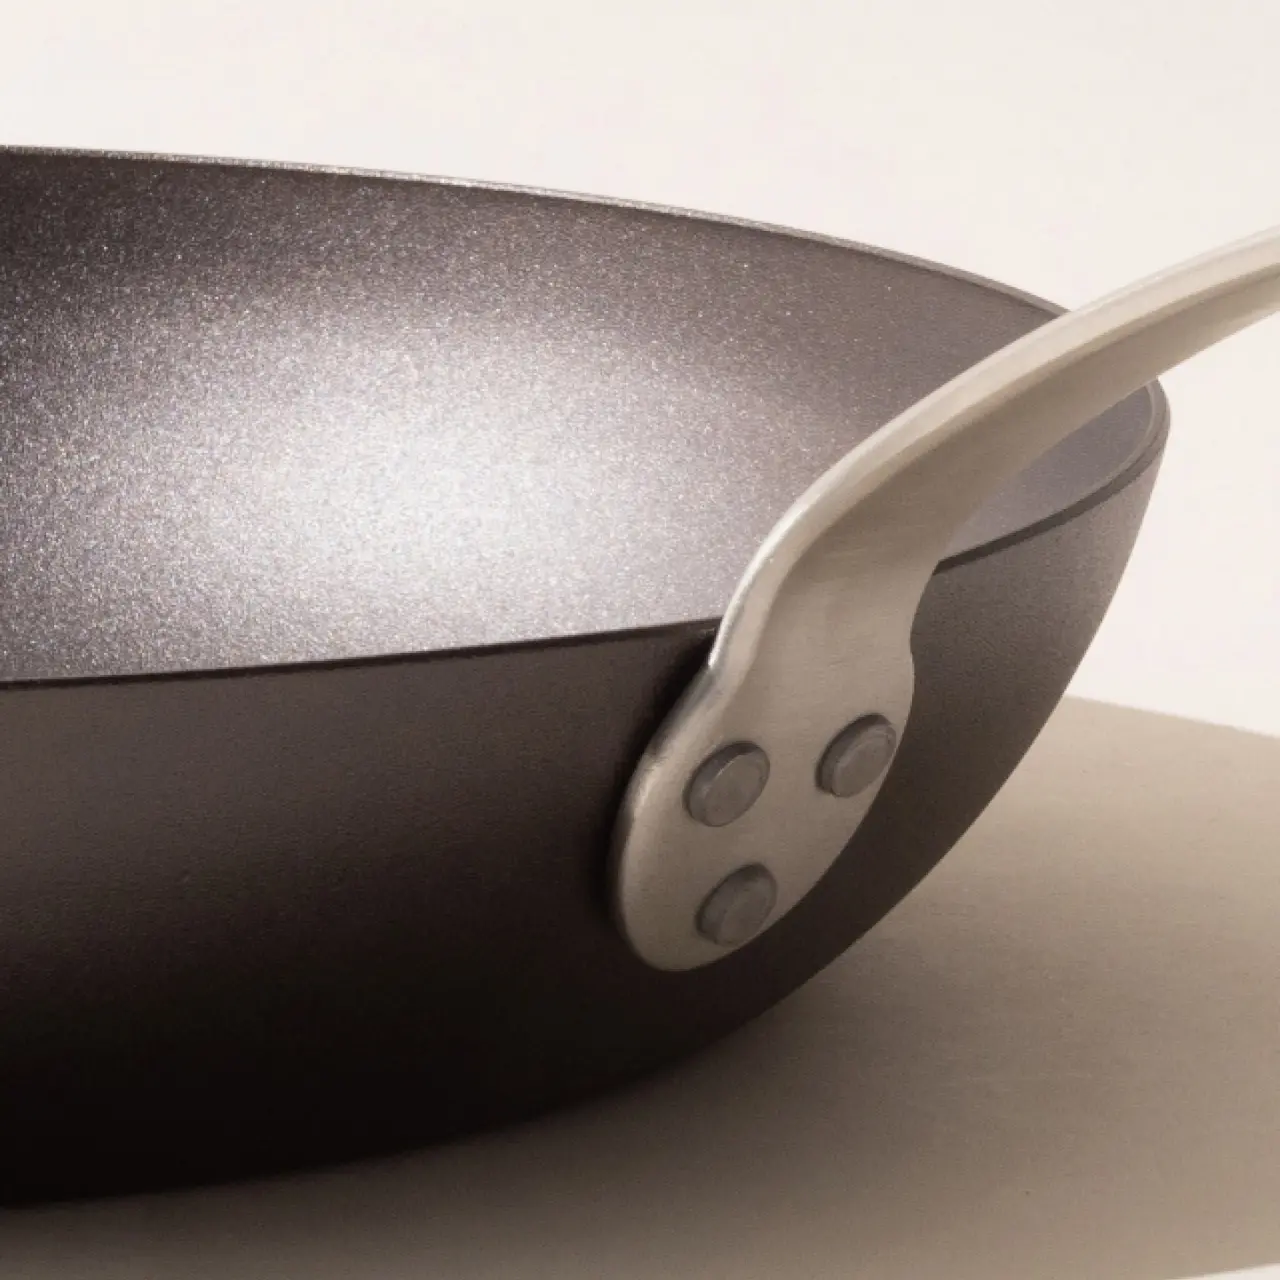 A close-up of a black frying pan with a silver handle, set against a neutral background.